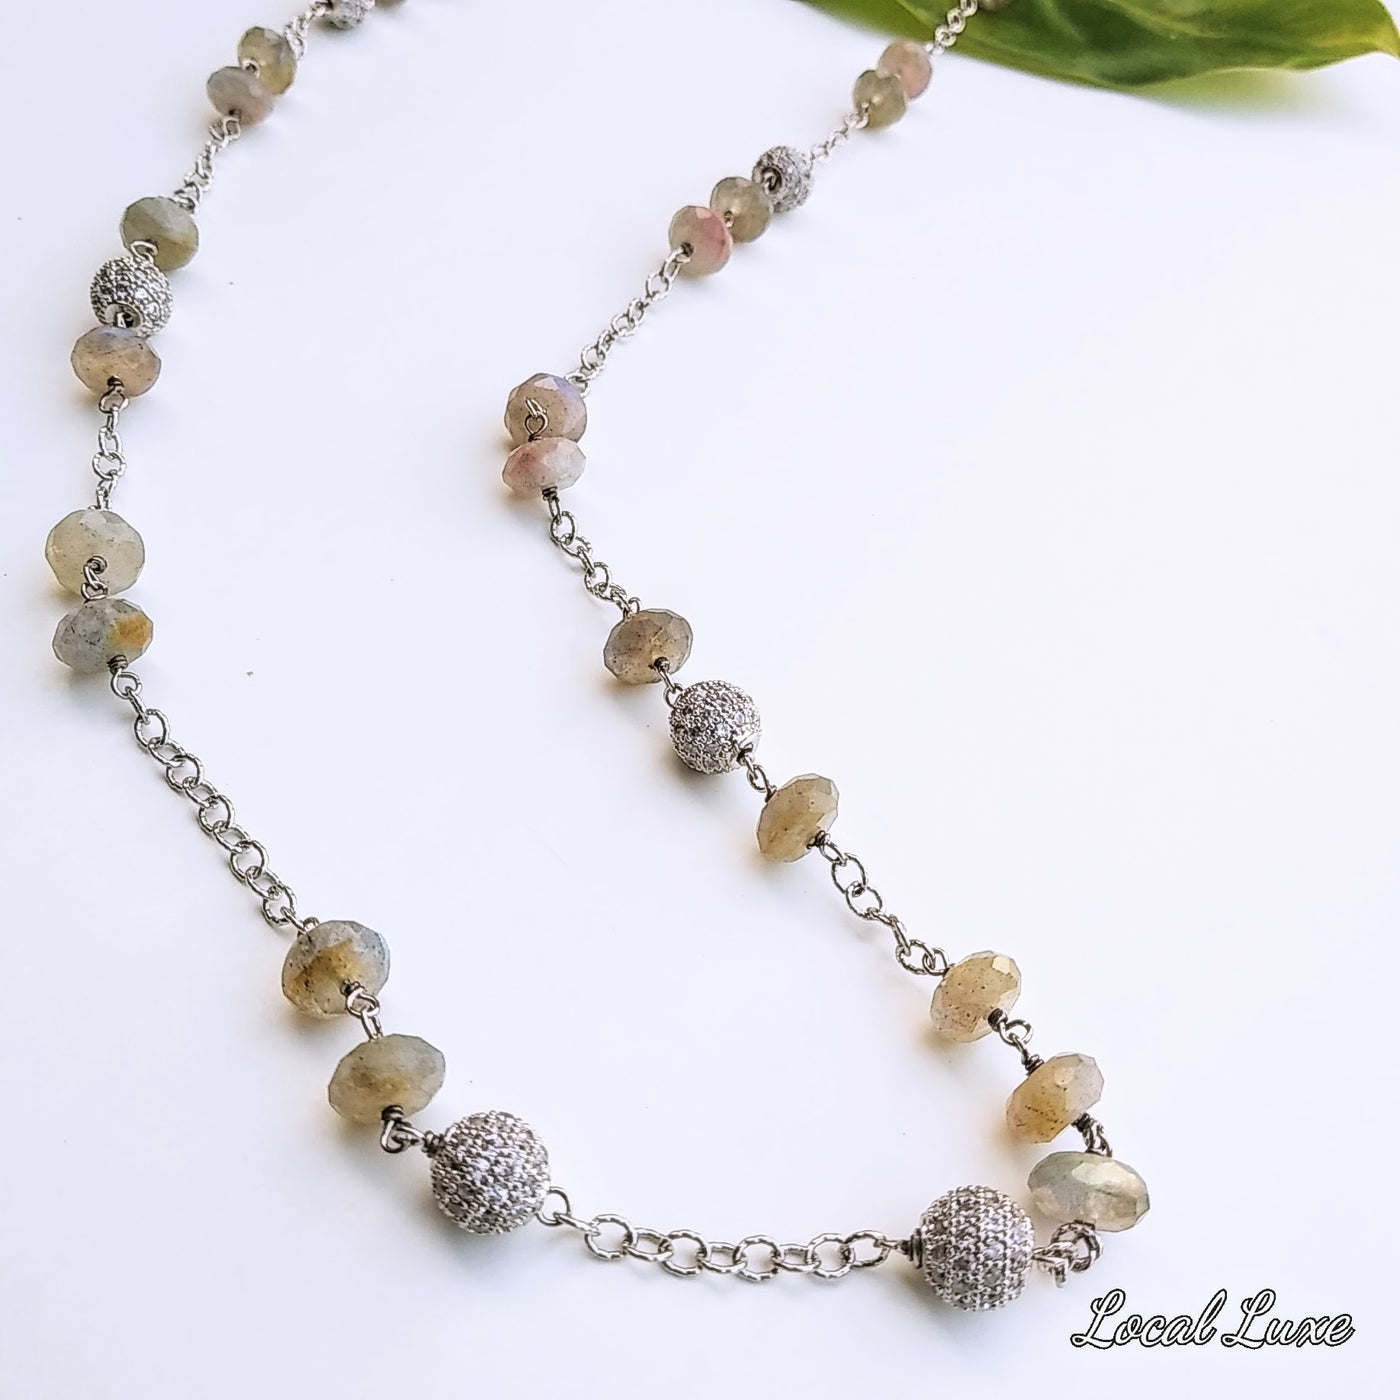 "The Silver Fox" 36" Necklace - Labradorite, Sterling, Crystal Pave, Gem Chain